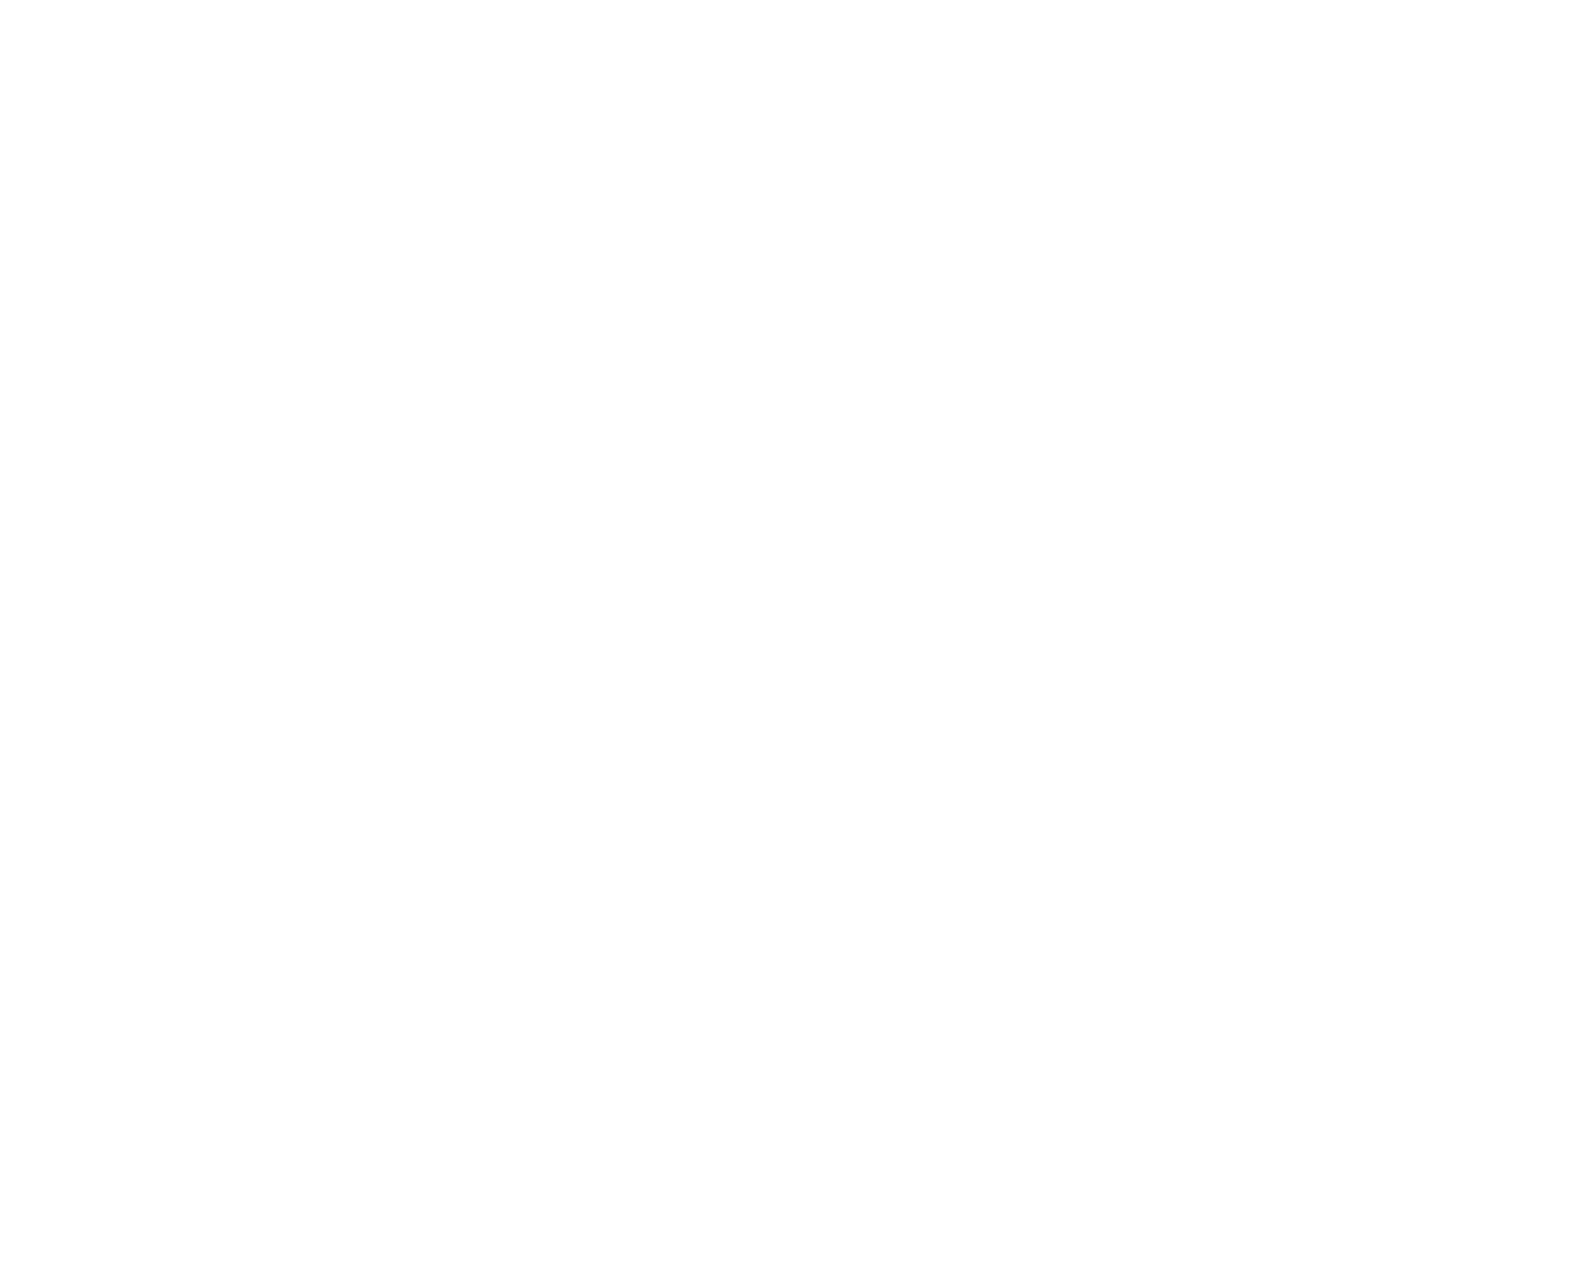 Kuwait Investment Company logo large for dark backgrounds (transparent PNG)